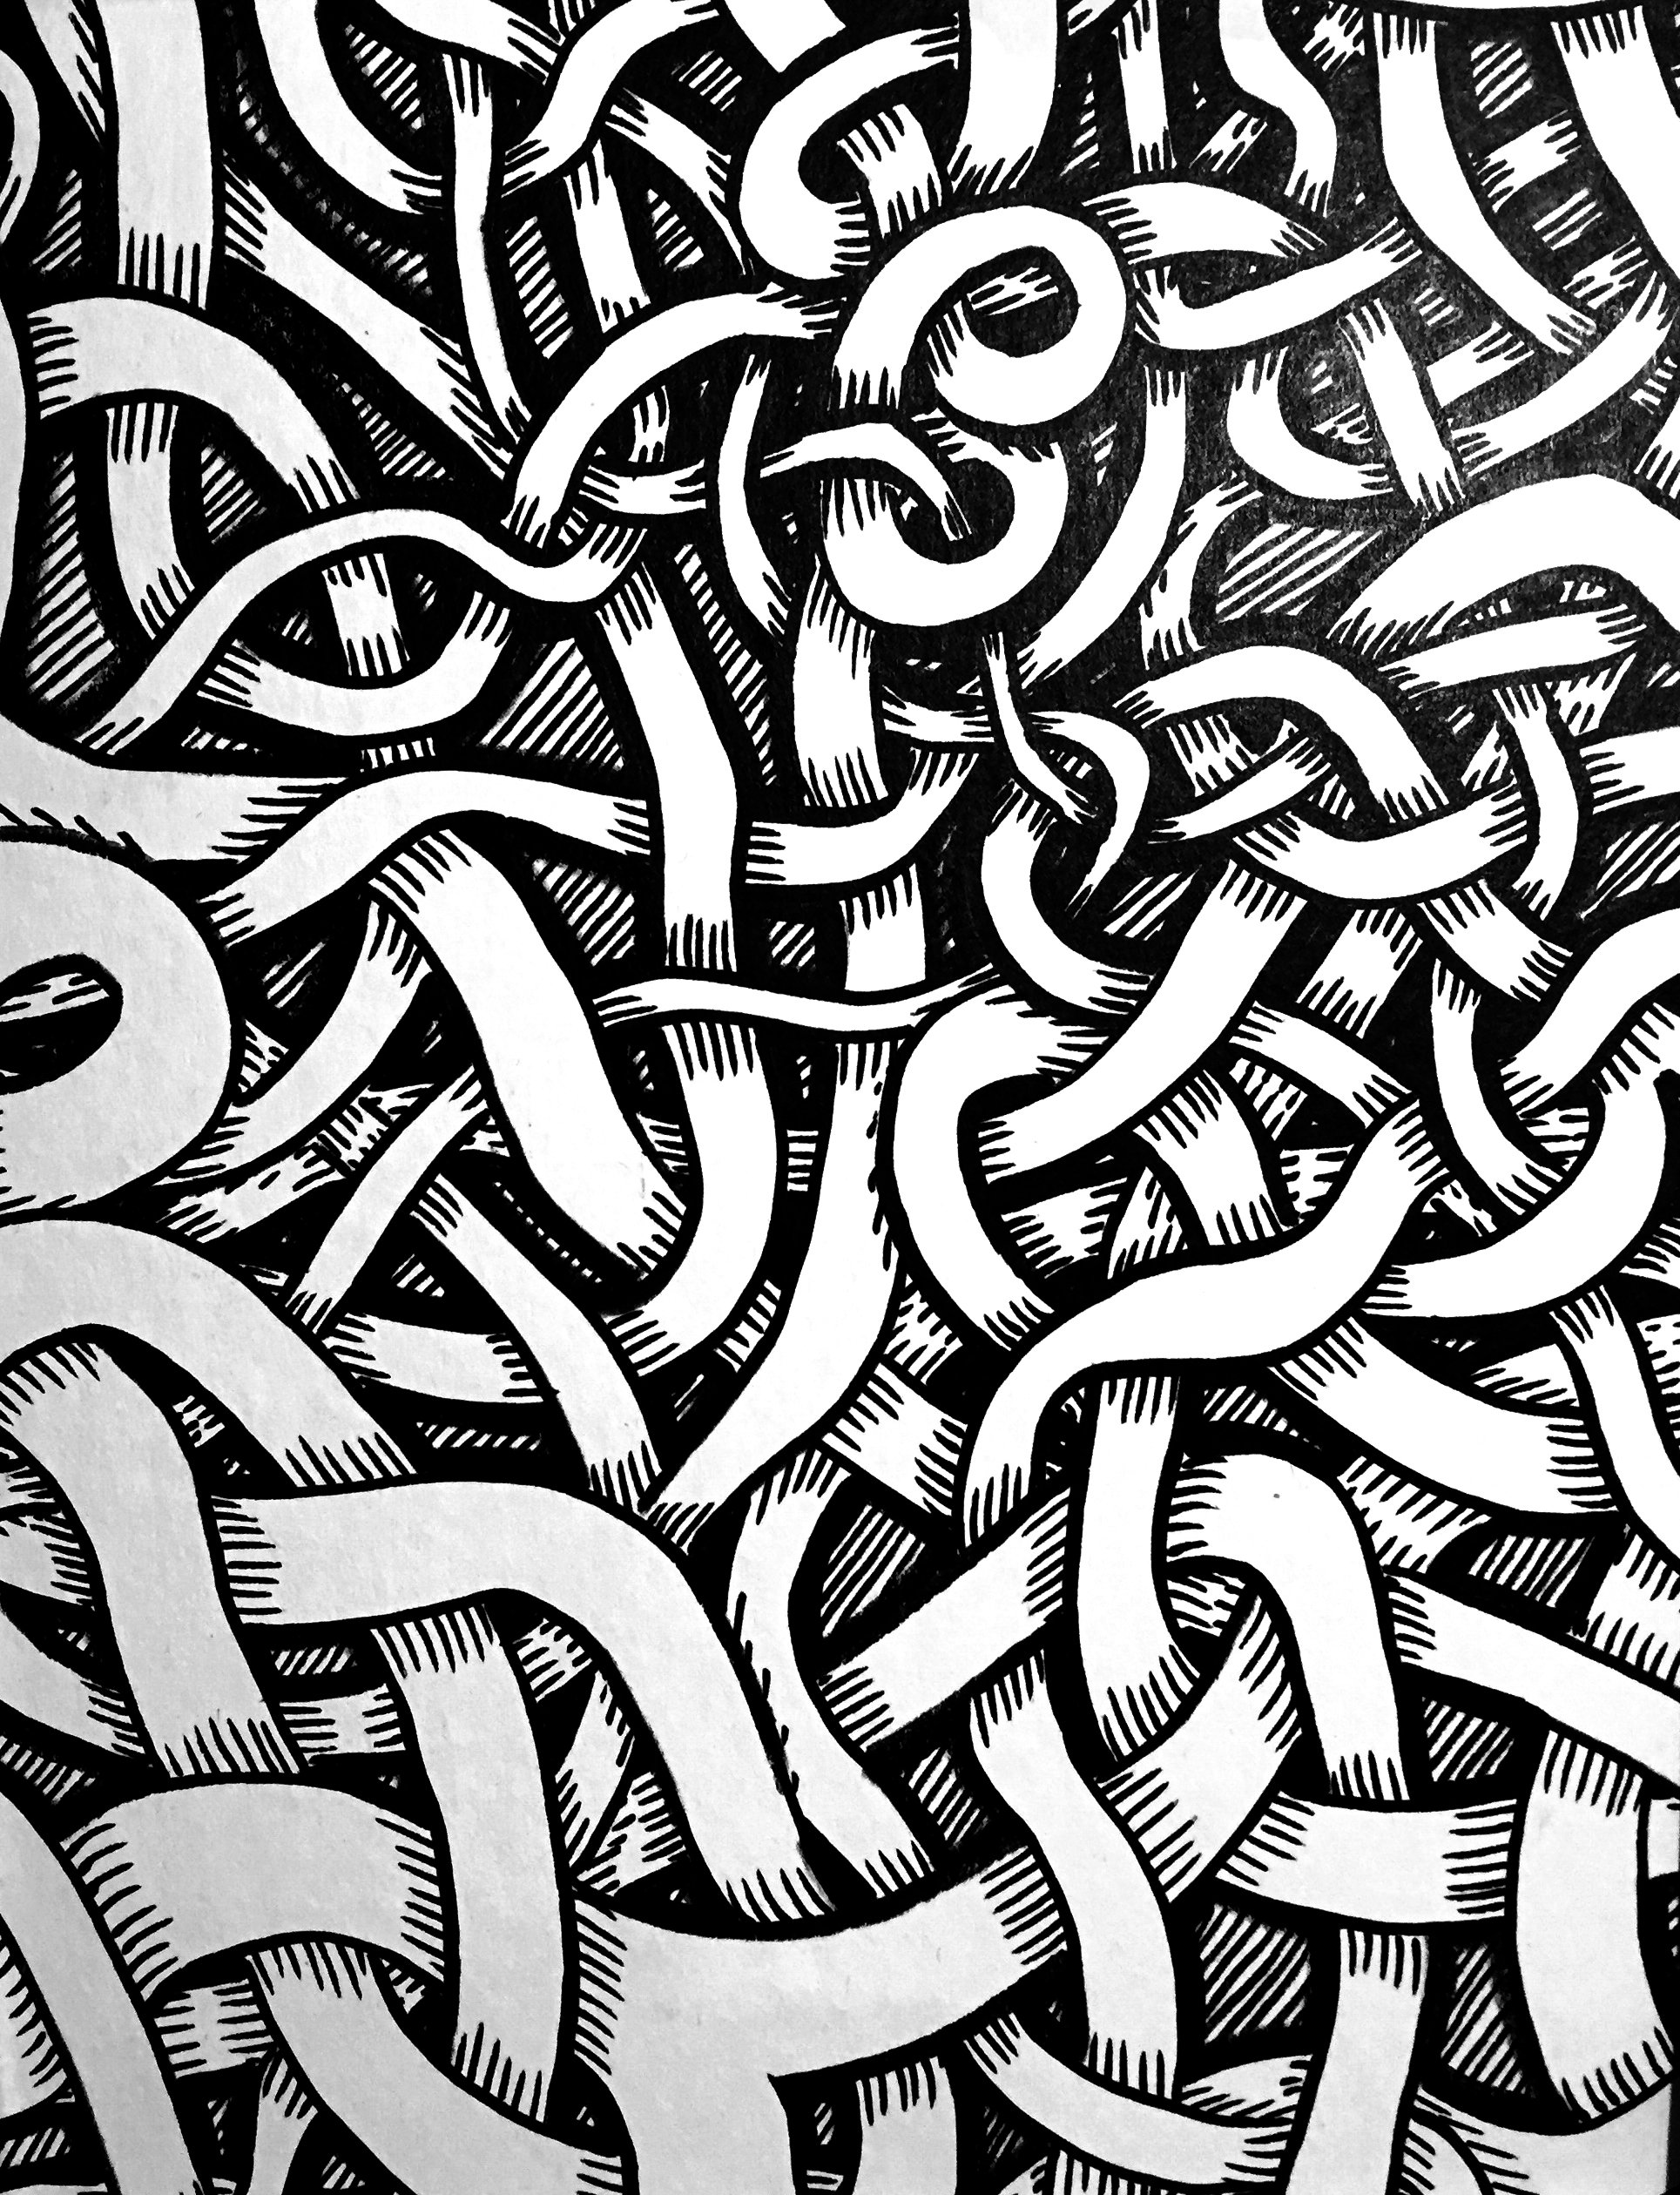   Old Knotwork 3  ink on paper. 2013    owned by Private Collector   